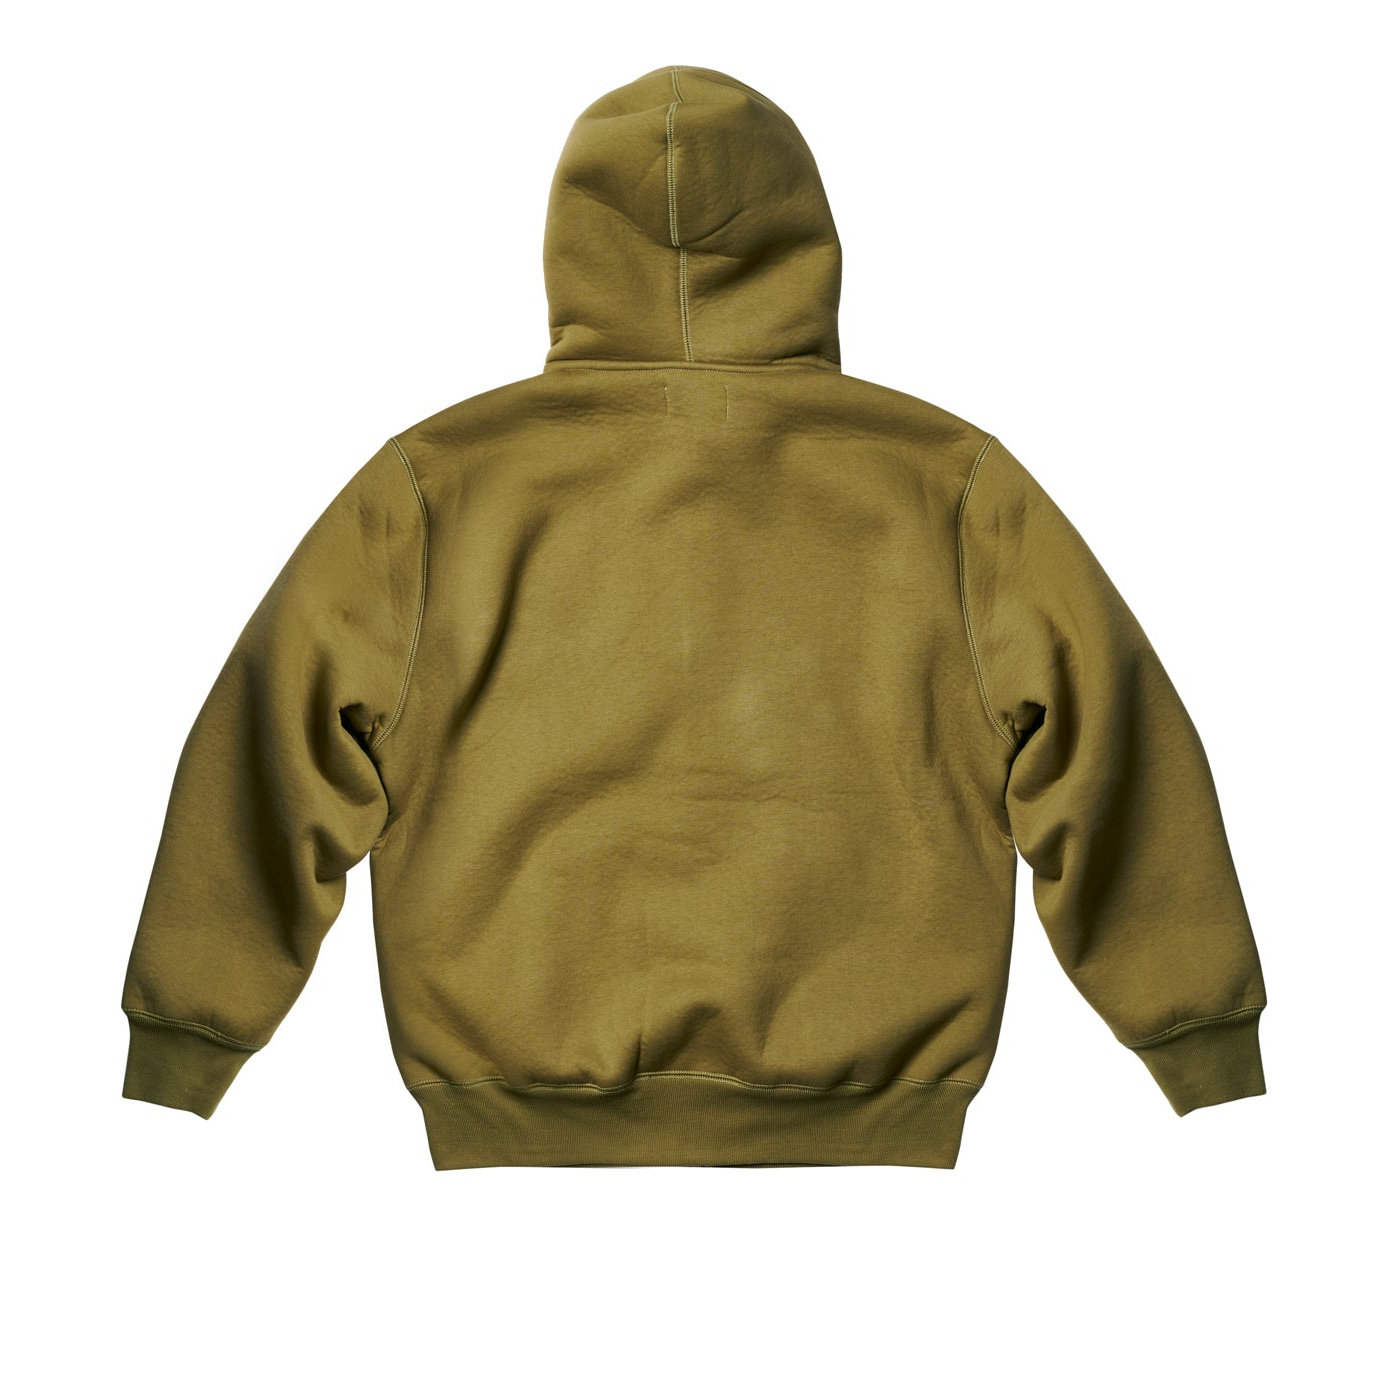 Thumbnail FACEMASK SHEARLING THERMAL HOOD OLIVE one color